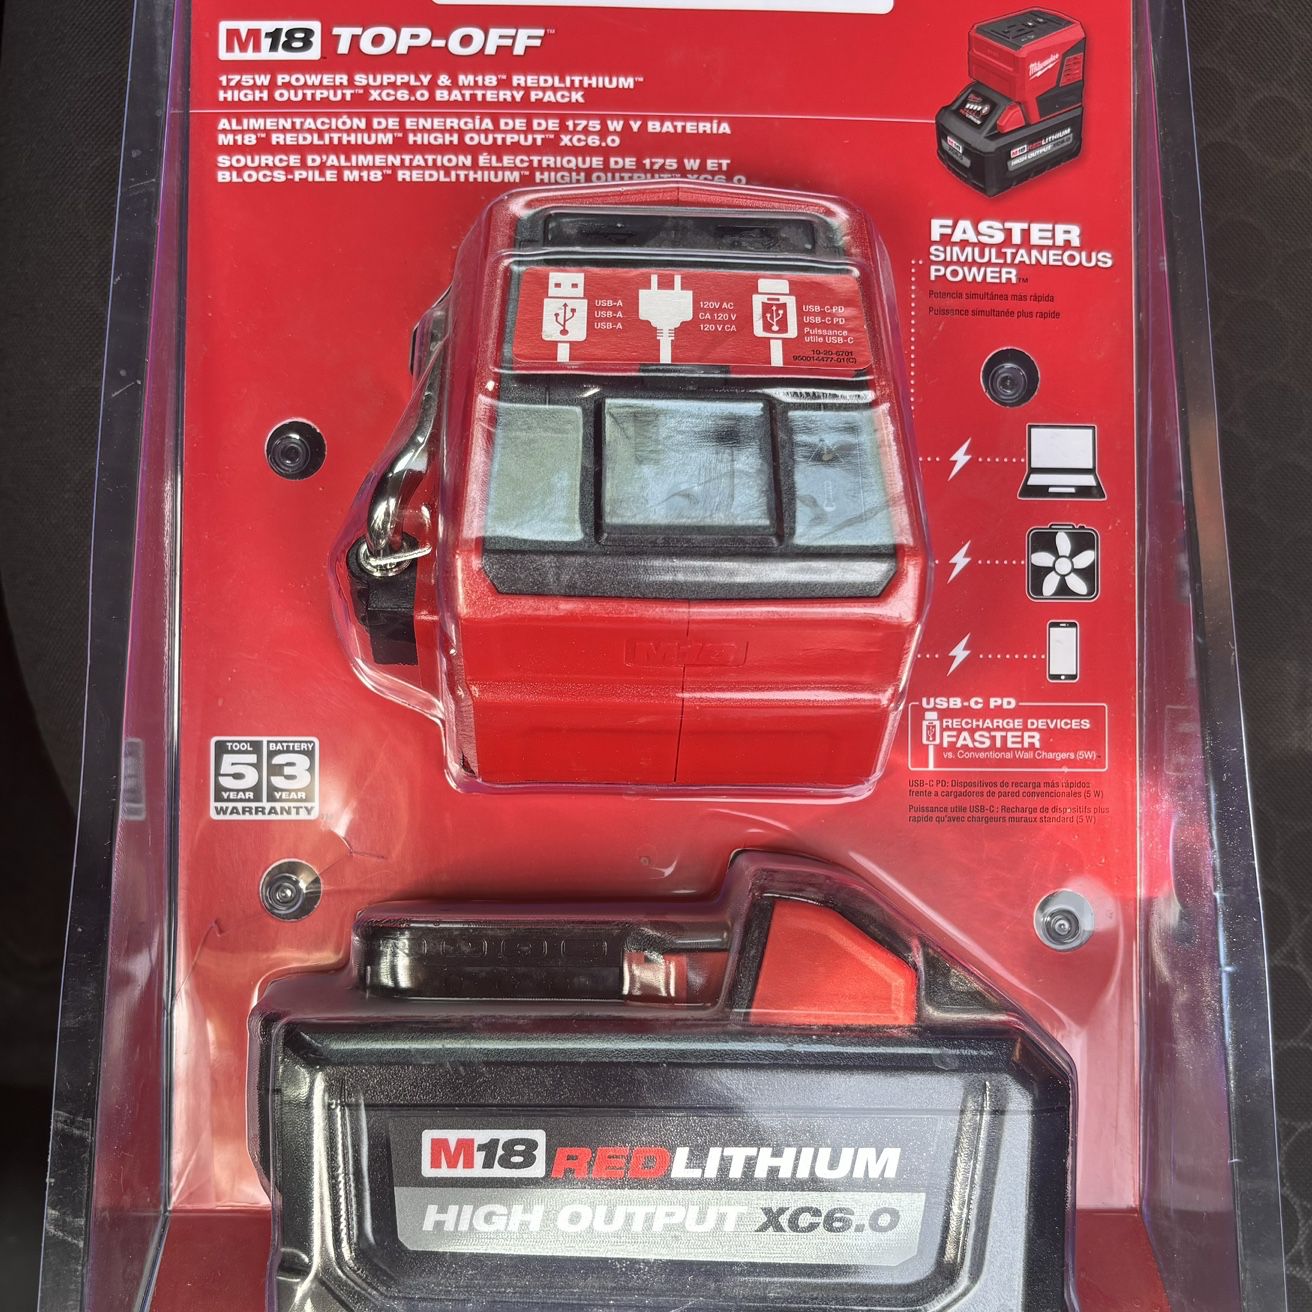 Milwaukee- M18 18V Lithium-Ion 175-Watt Powered Compact Inverter for M18 Batteries with (1) M18 HIGH OUTPUT Red lithium 6.0 Ah Battery